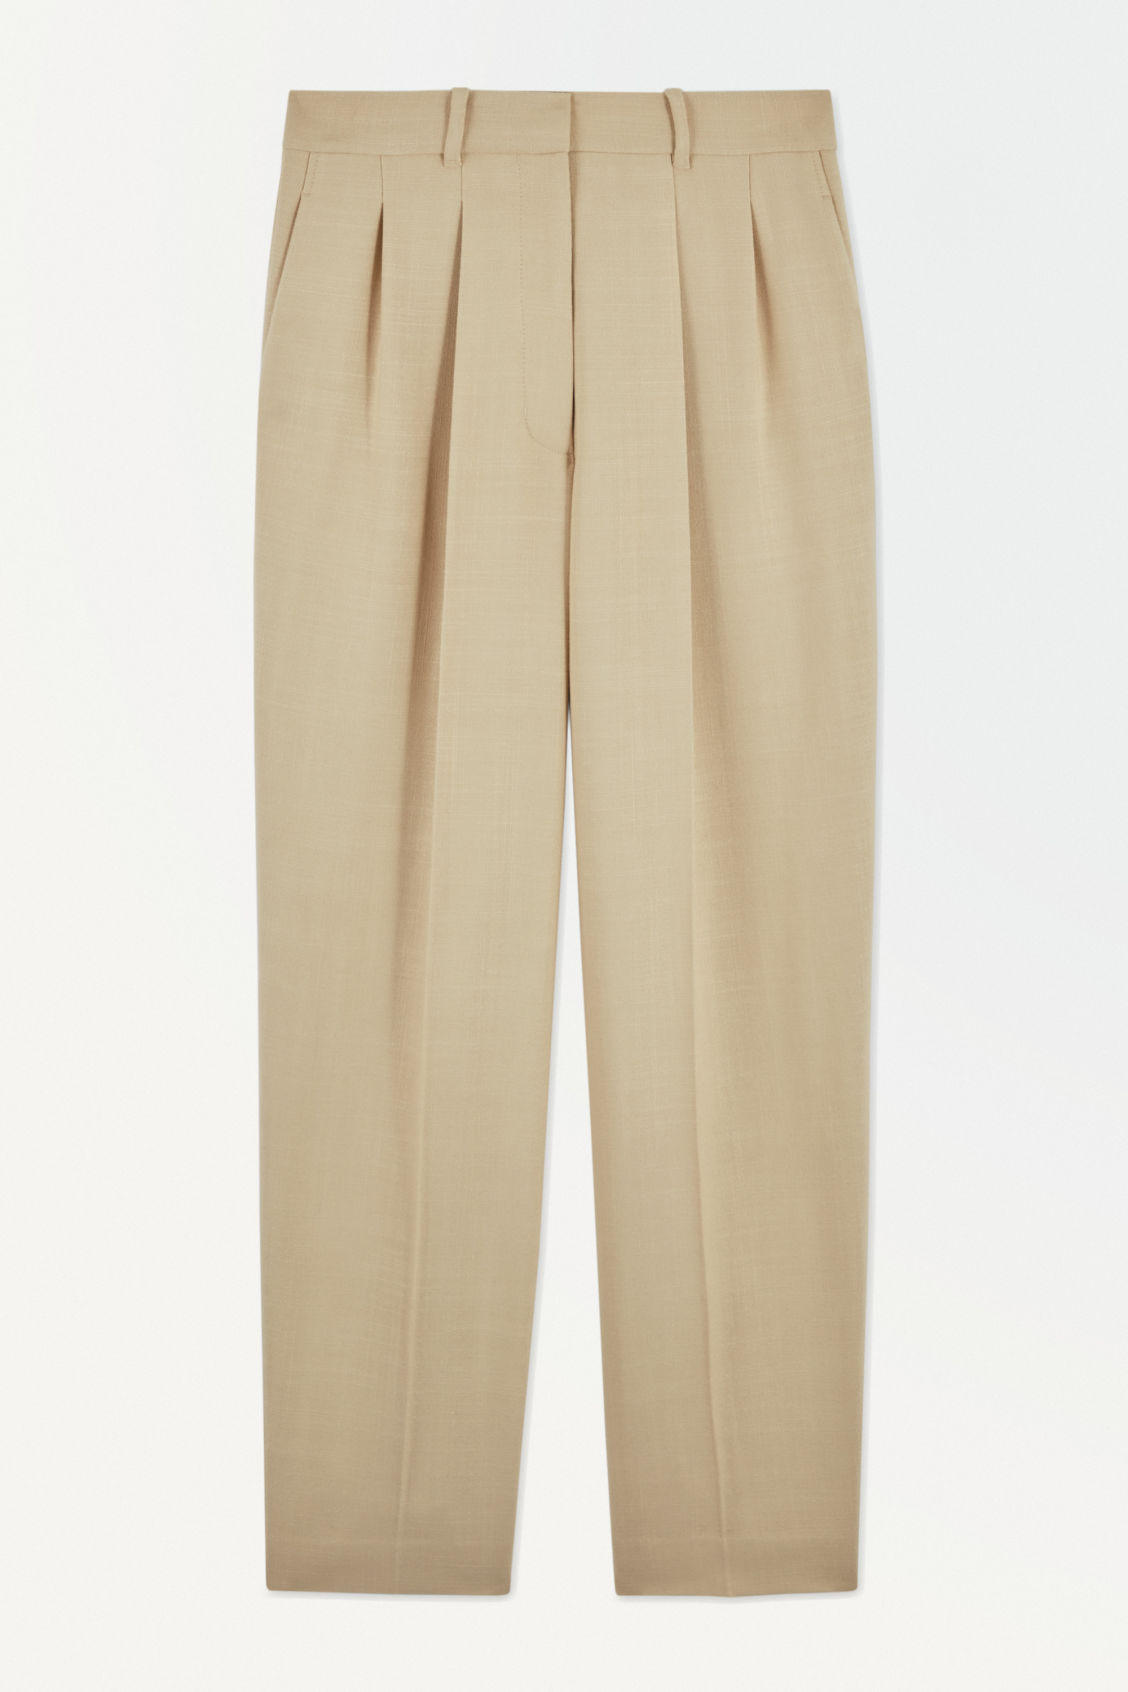 THE PLEATED TAILORED PANTS